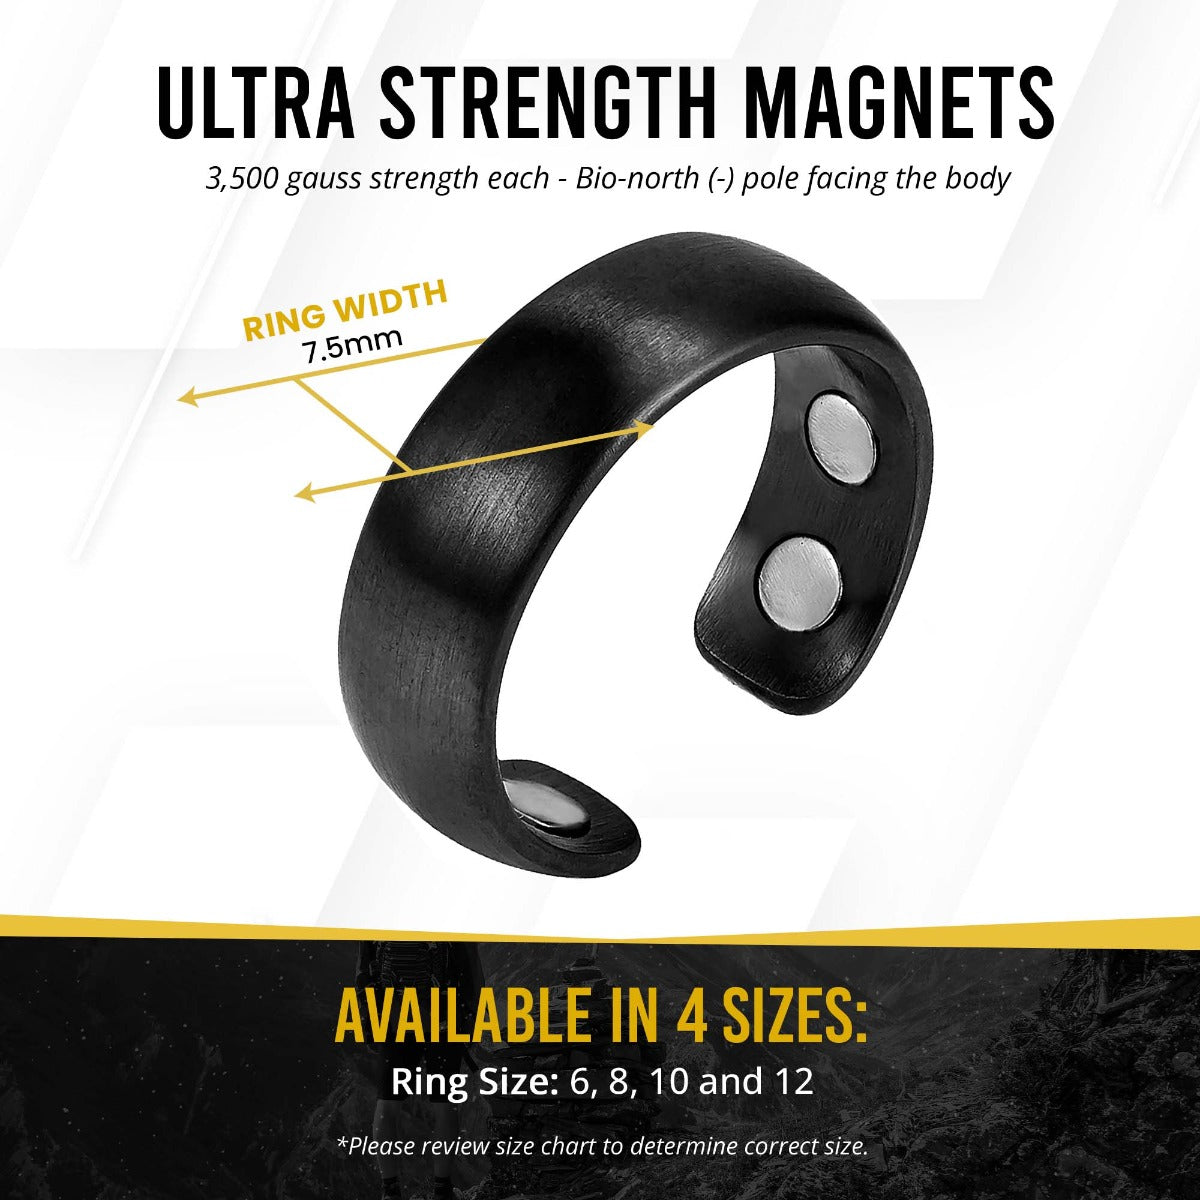 Magnetic Ring Magnetic Therapy Ring (Brushed Black) MagnetRX